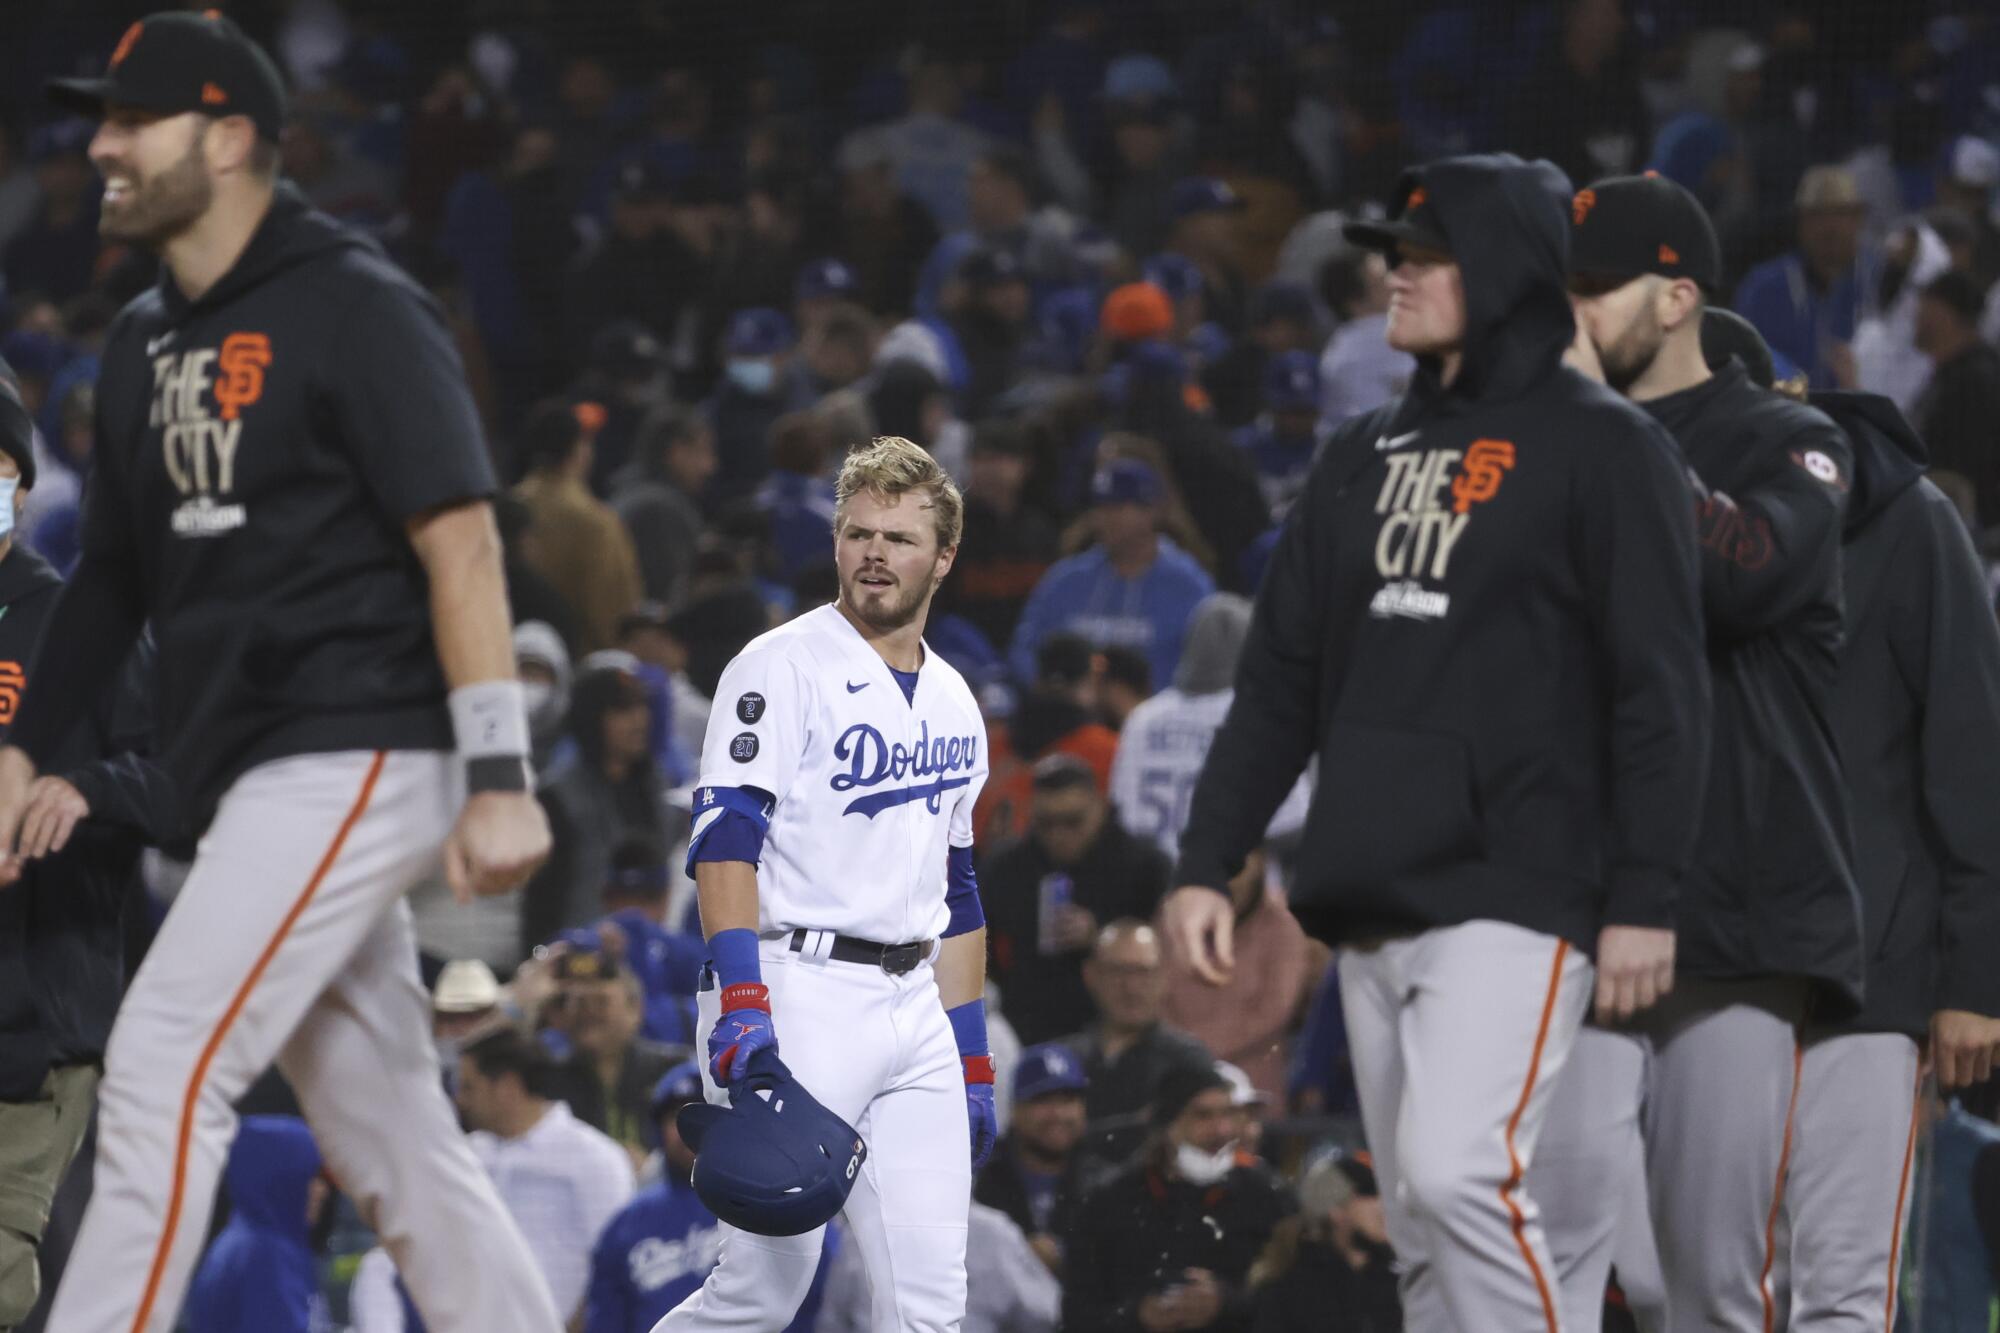  Dodgers' Gavin Lux reacts after flying out for final out.